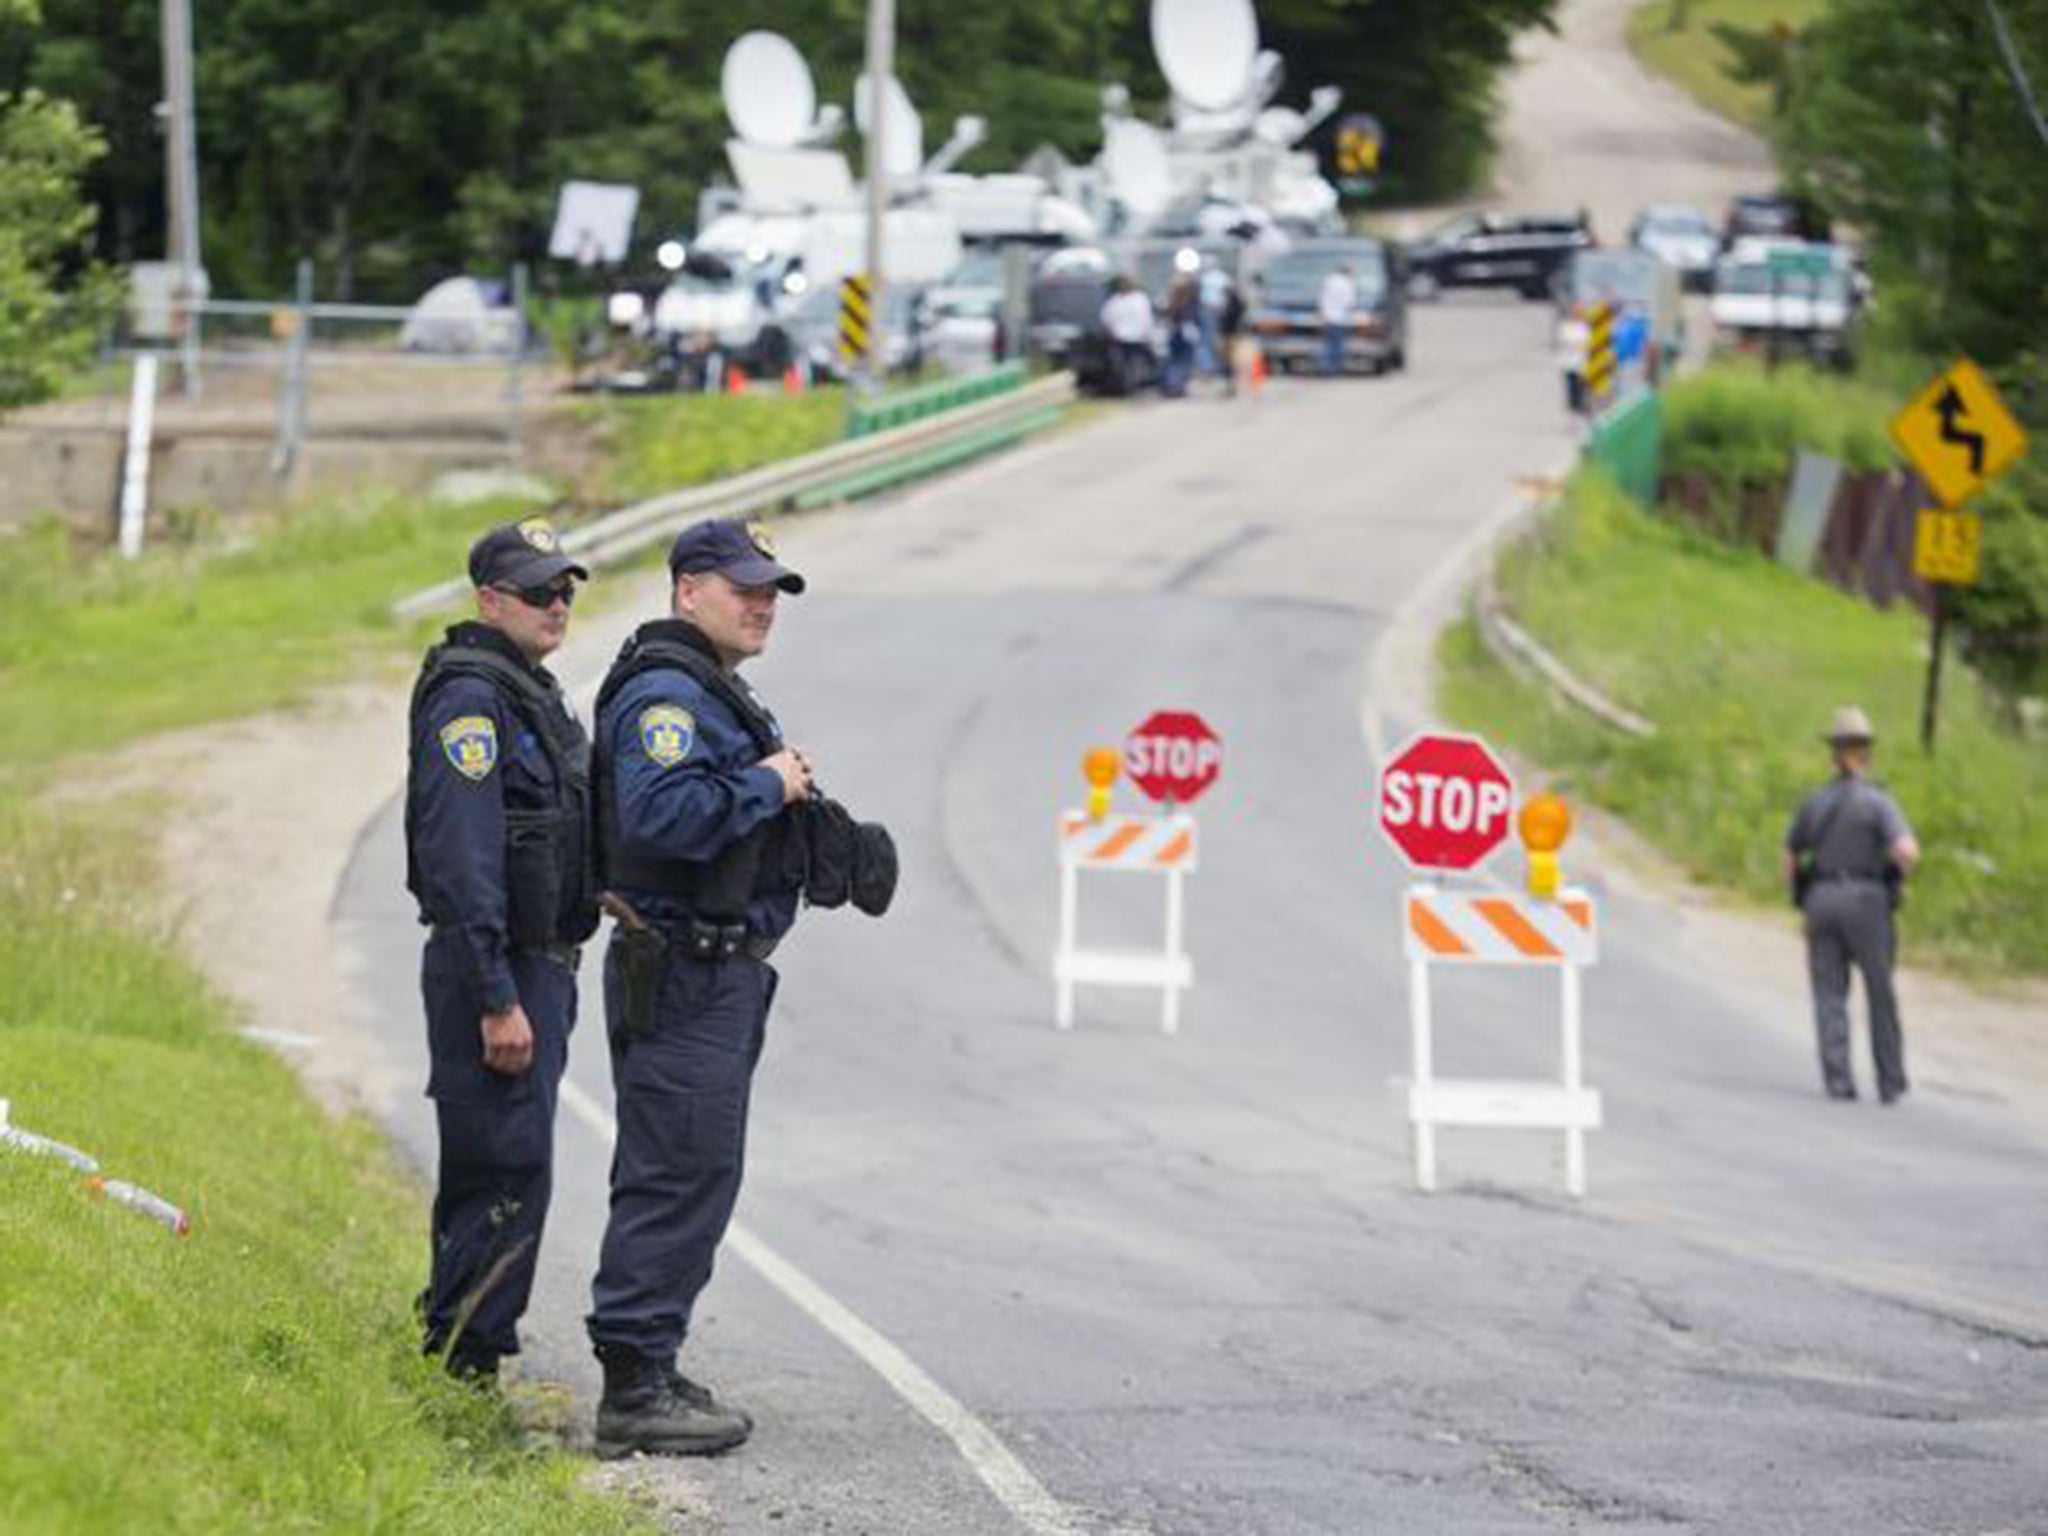 The search for prisoner David Sweat is reportedly over, with the escaped inmate currently in custody after being shot by police near the Canadian border